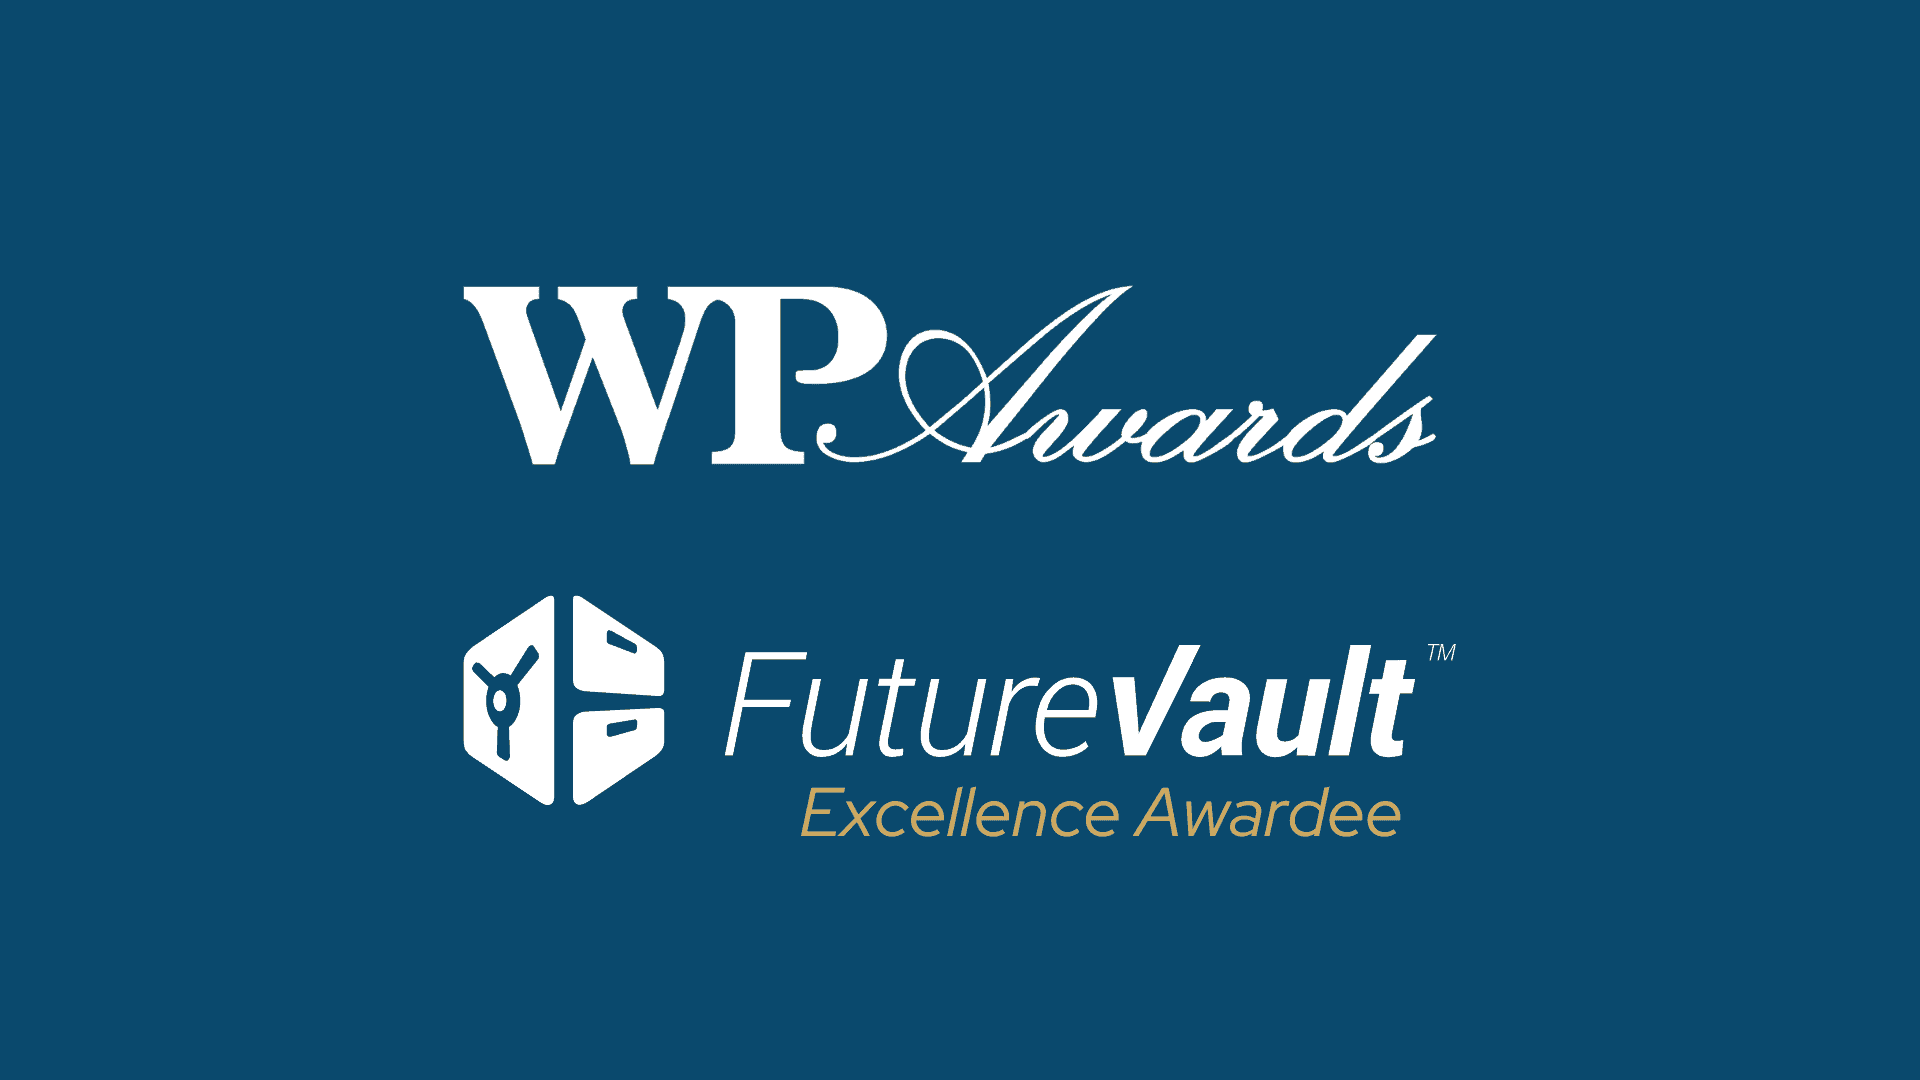 FutureVault Named Excellence Awardee for WealthTech Service Provider of the Year